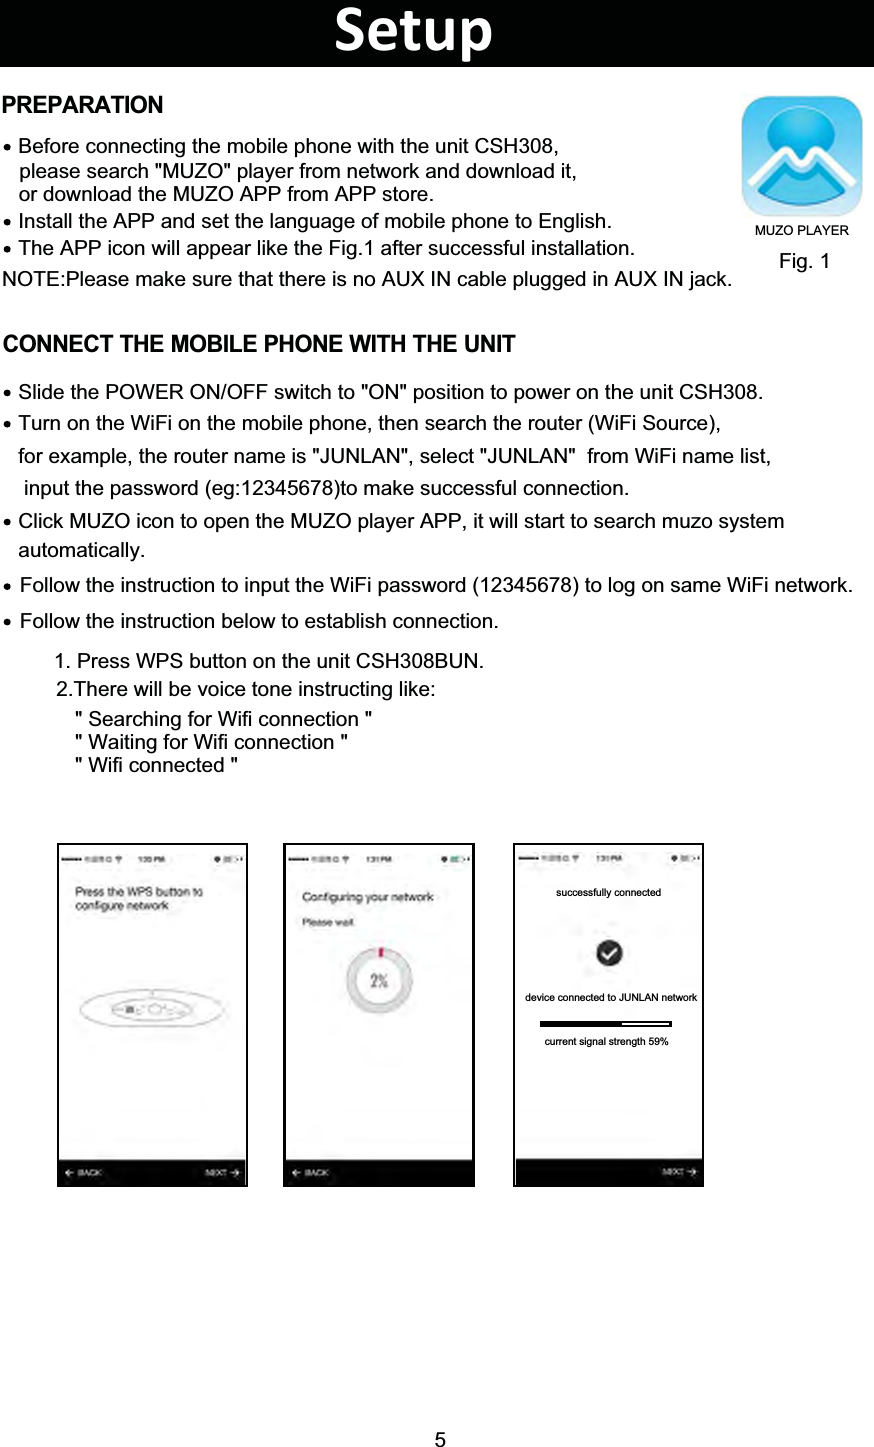 5Install the APP and set the language of mobile phone to English.Before connecting the mobile phone with the unit CSH308,please search &quot;MUZO&quot; player from network and download it, or download the MUZO APP from APP store.The APP icon will appear like the Fig.1 after successful installation. Fig. 1PREPARATIONCONNECT THE MOBILE PHONE WITH THE UNITTurn on the WiFi on the mobile phone, then search the router (WiFi Source), Slide the POWER ON/OFF switch to &quot;ON&quot; position to power on the unit CSH308. Click MUZO icon to open the MUZO player APP, it will start to search muzo system for example, the router name is &quot;JUNLAN&quot;, select &quot;JUNLAN&quot;  from WiFi name list,  input the password (eg:12345678)to make successful connection. automatically. Follow the instruction to input the WiFi password (12345678) to log on same WiFi network. Follow the instruction below to establish connection. 1. Press WPS button on the unit CSH308BUN.2.There will be voice tone instructing like:&quot; Searching for Wifi connection &quot;&quot; Waiting for Wifi connection &quot;&quot; Wifi connected &quot;Setupsuccessfully connecteddevice connected to JUNLAN networkcurrent signal strength 59%MUZO PLAYERNOTE:Please make sure that there is no AUX IN cable plugged in AUX IN jack.